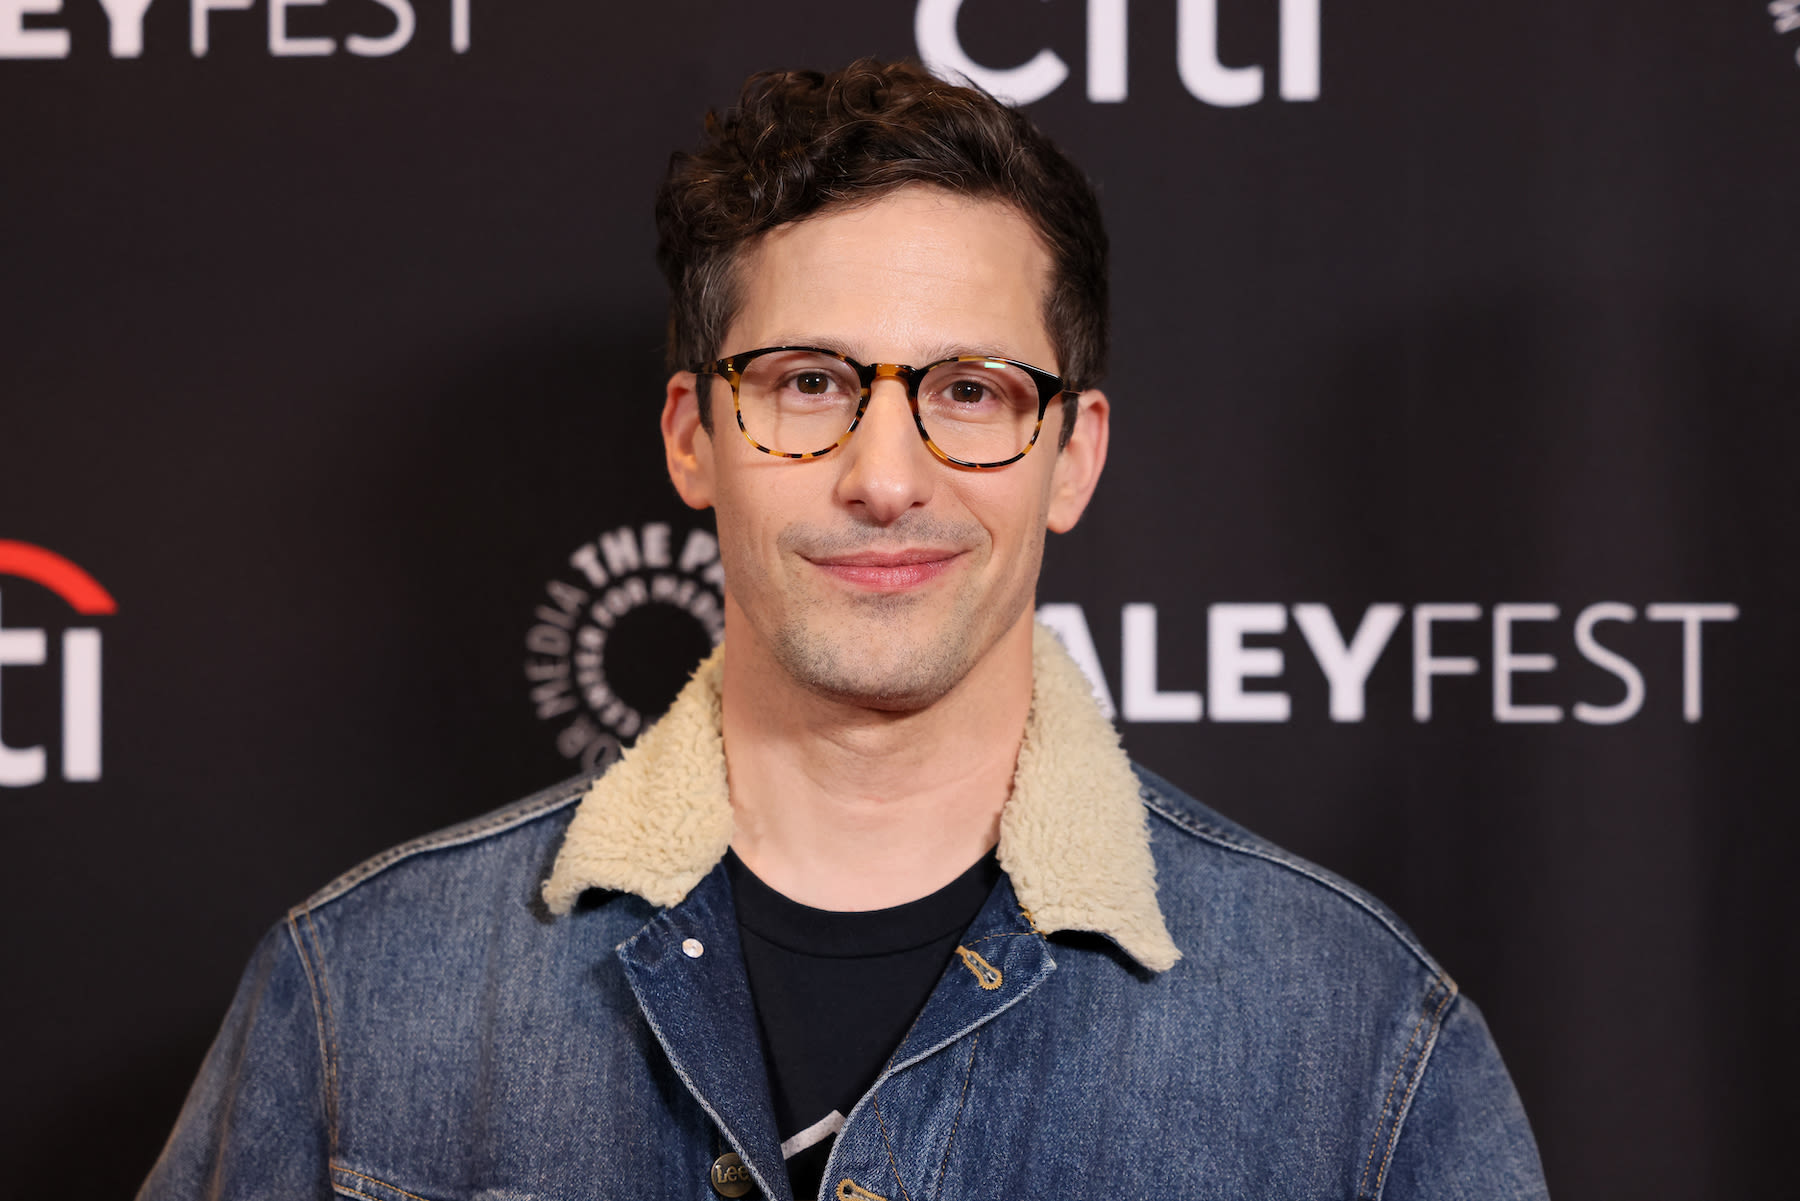 Andy Samberg Opens Up About ‘Difficult’ Decision to Leave ‘SNL’: ‘I Was Falling Apart in My Life’